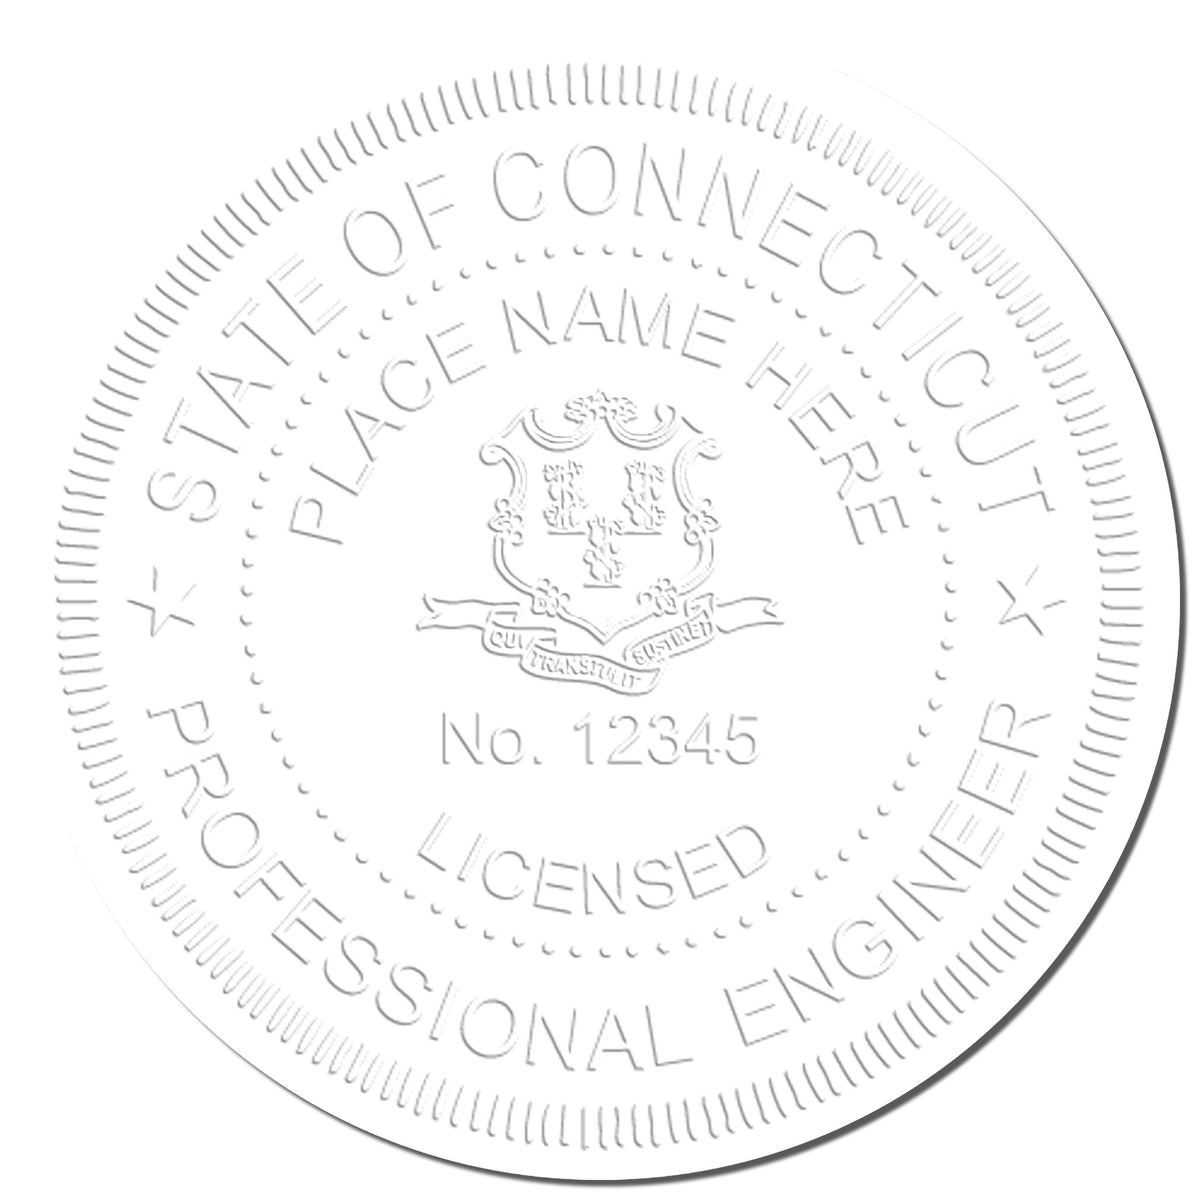 The Long Reach Connecticut PE Seal stamp impression comes to life with a crisp, detailed photo on paper - showcasing true professional quality.